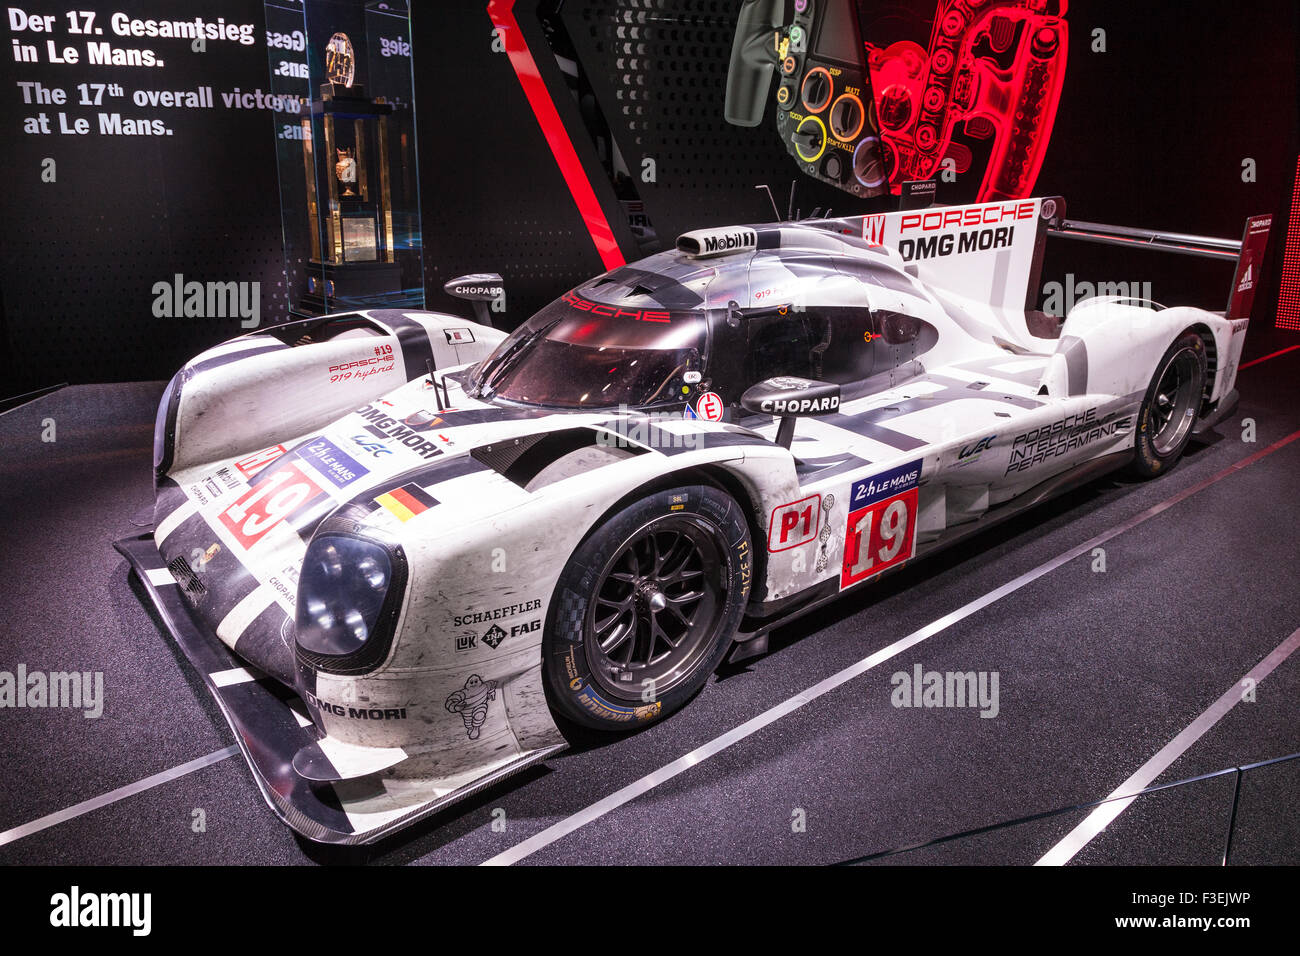 Porsche 919 High Resolution Stock Photography and Images - Alamy